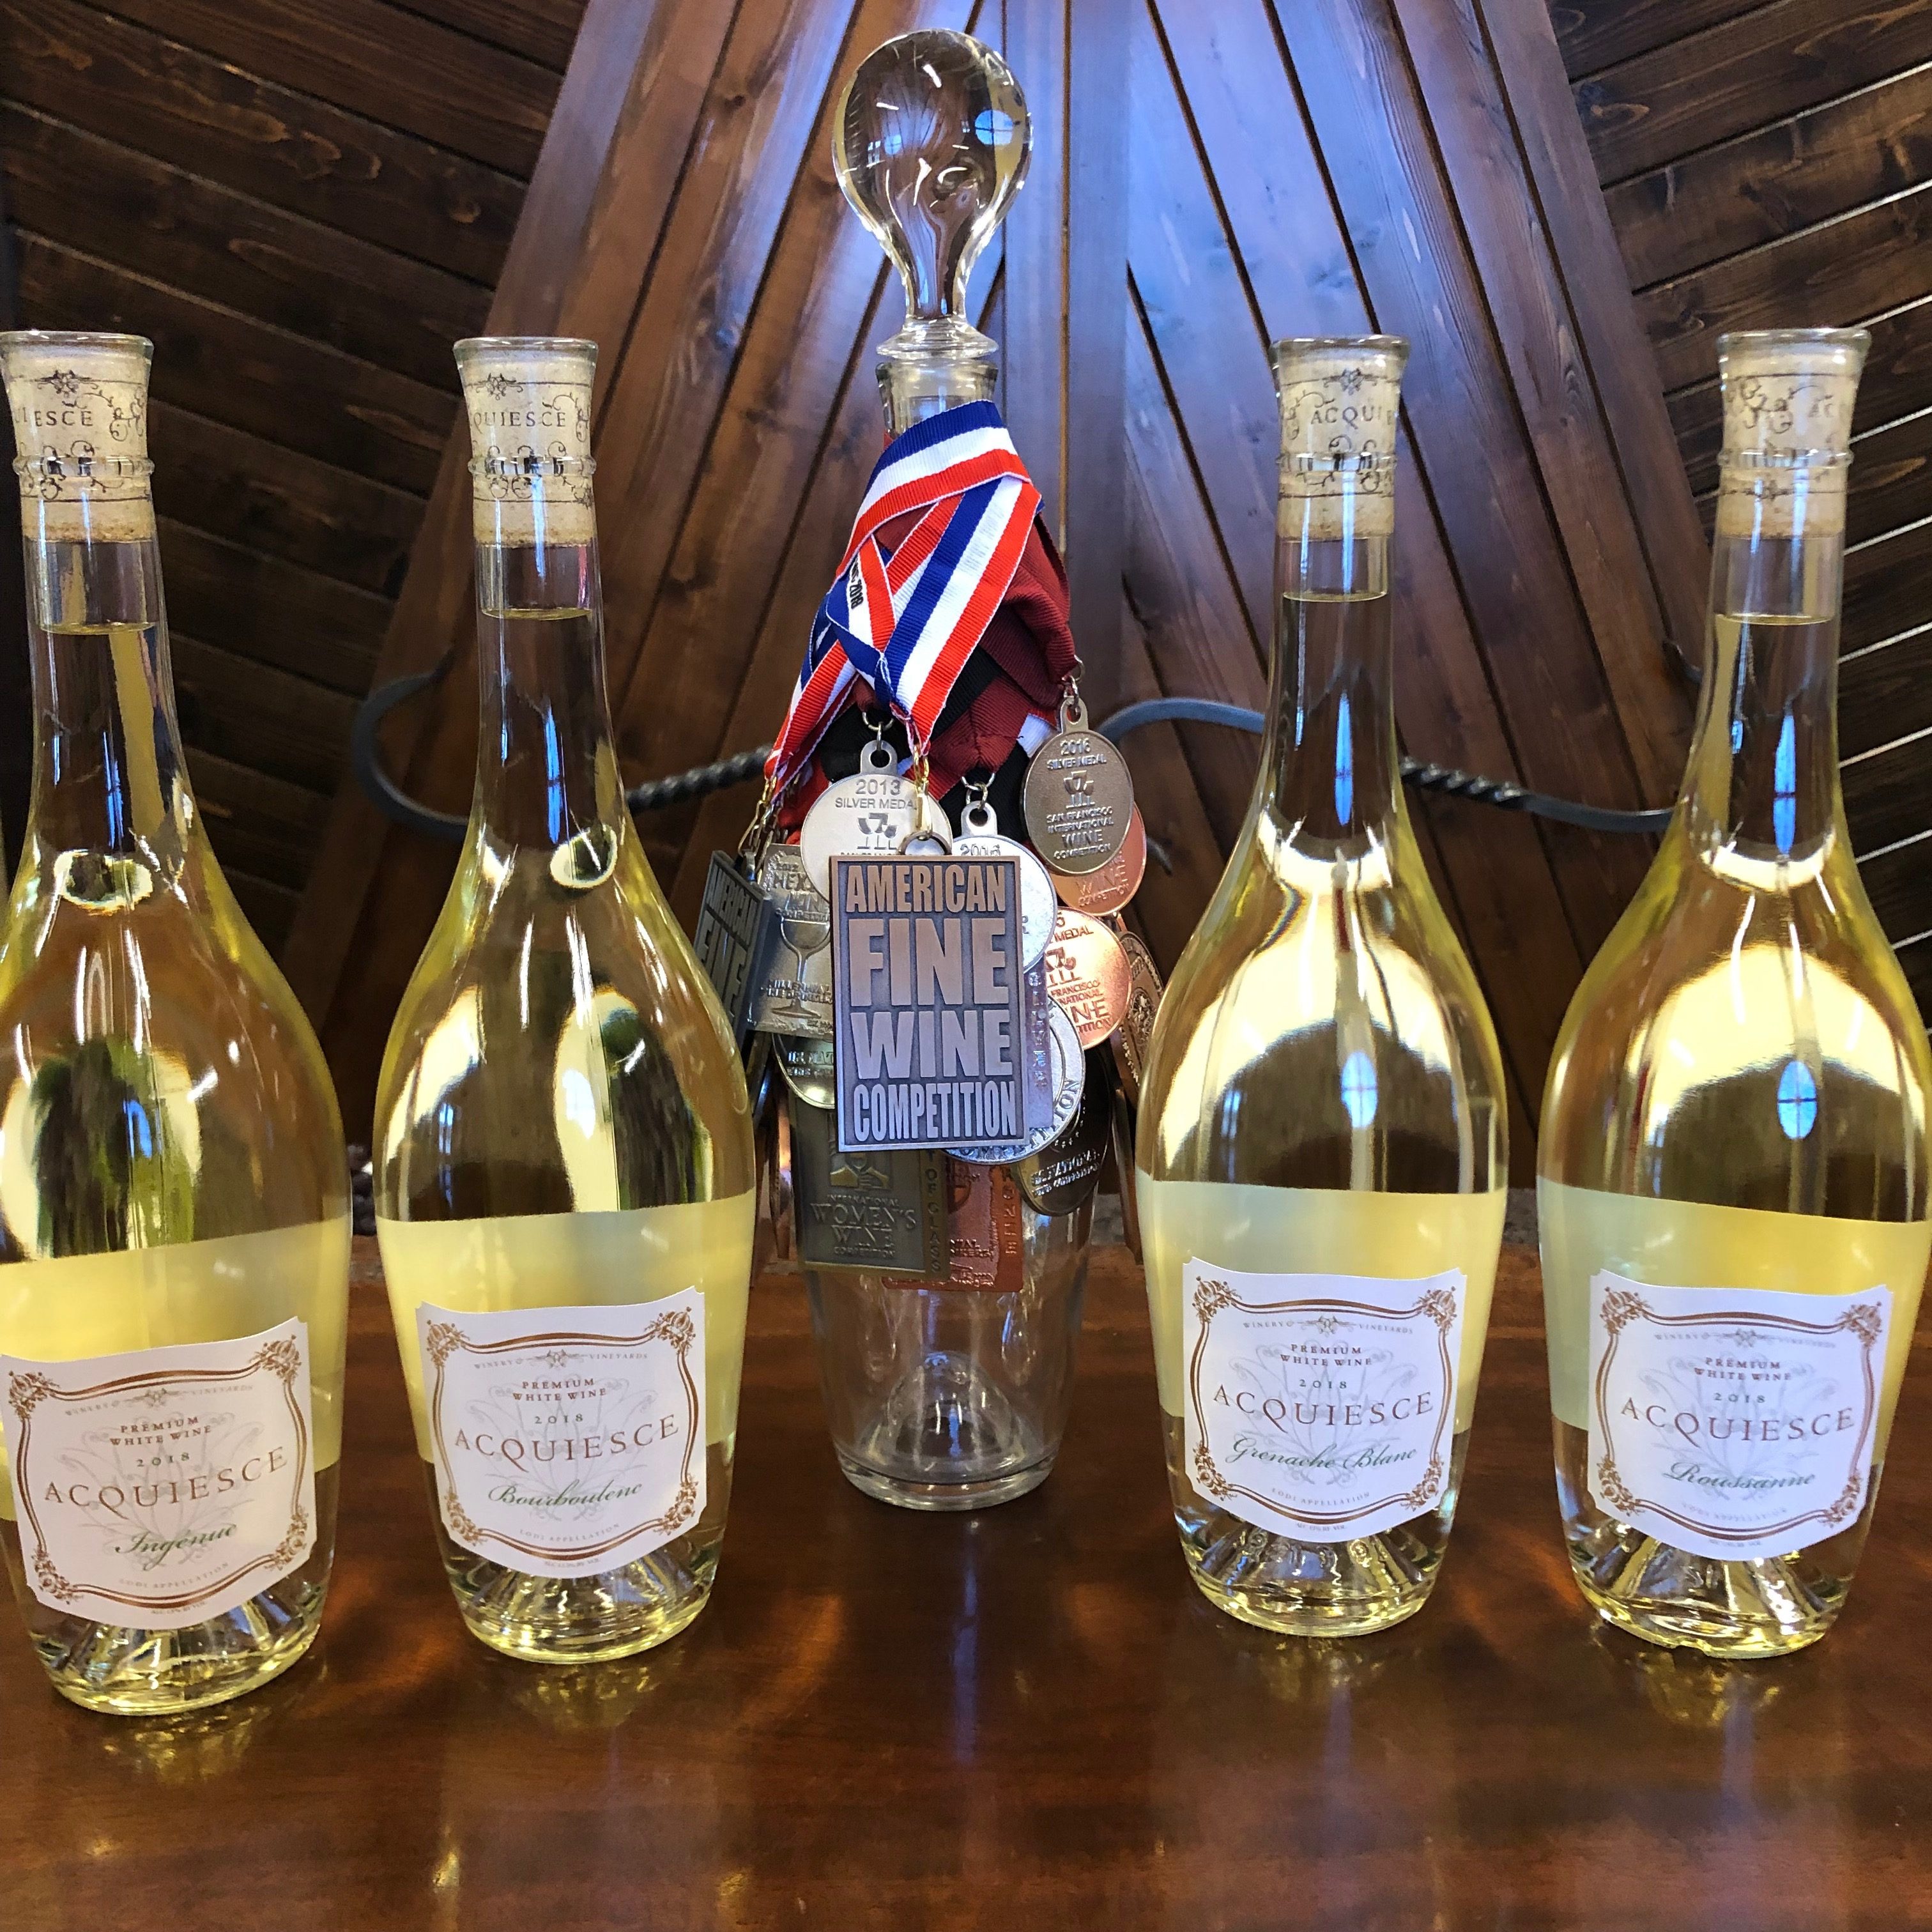 White Gold at Acquiesce Winery & Vineyards